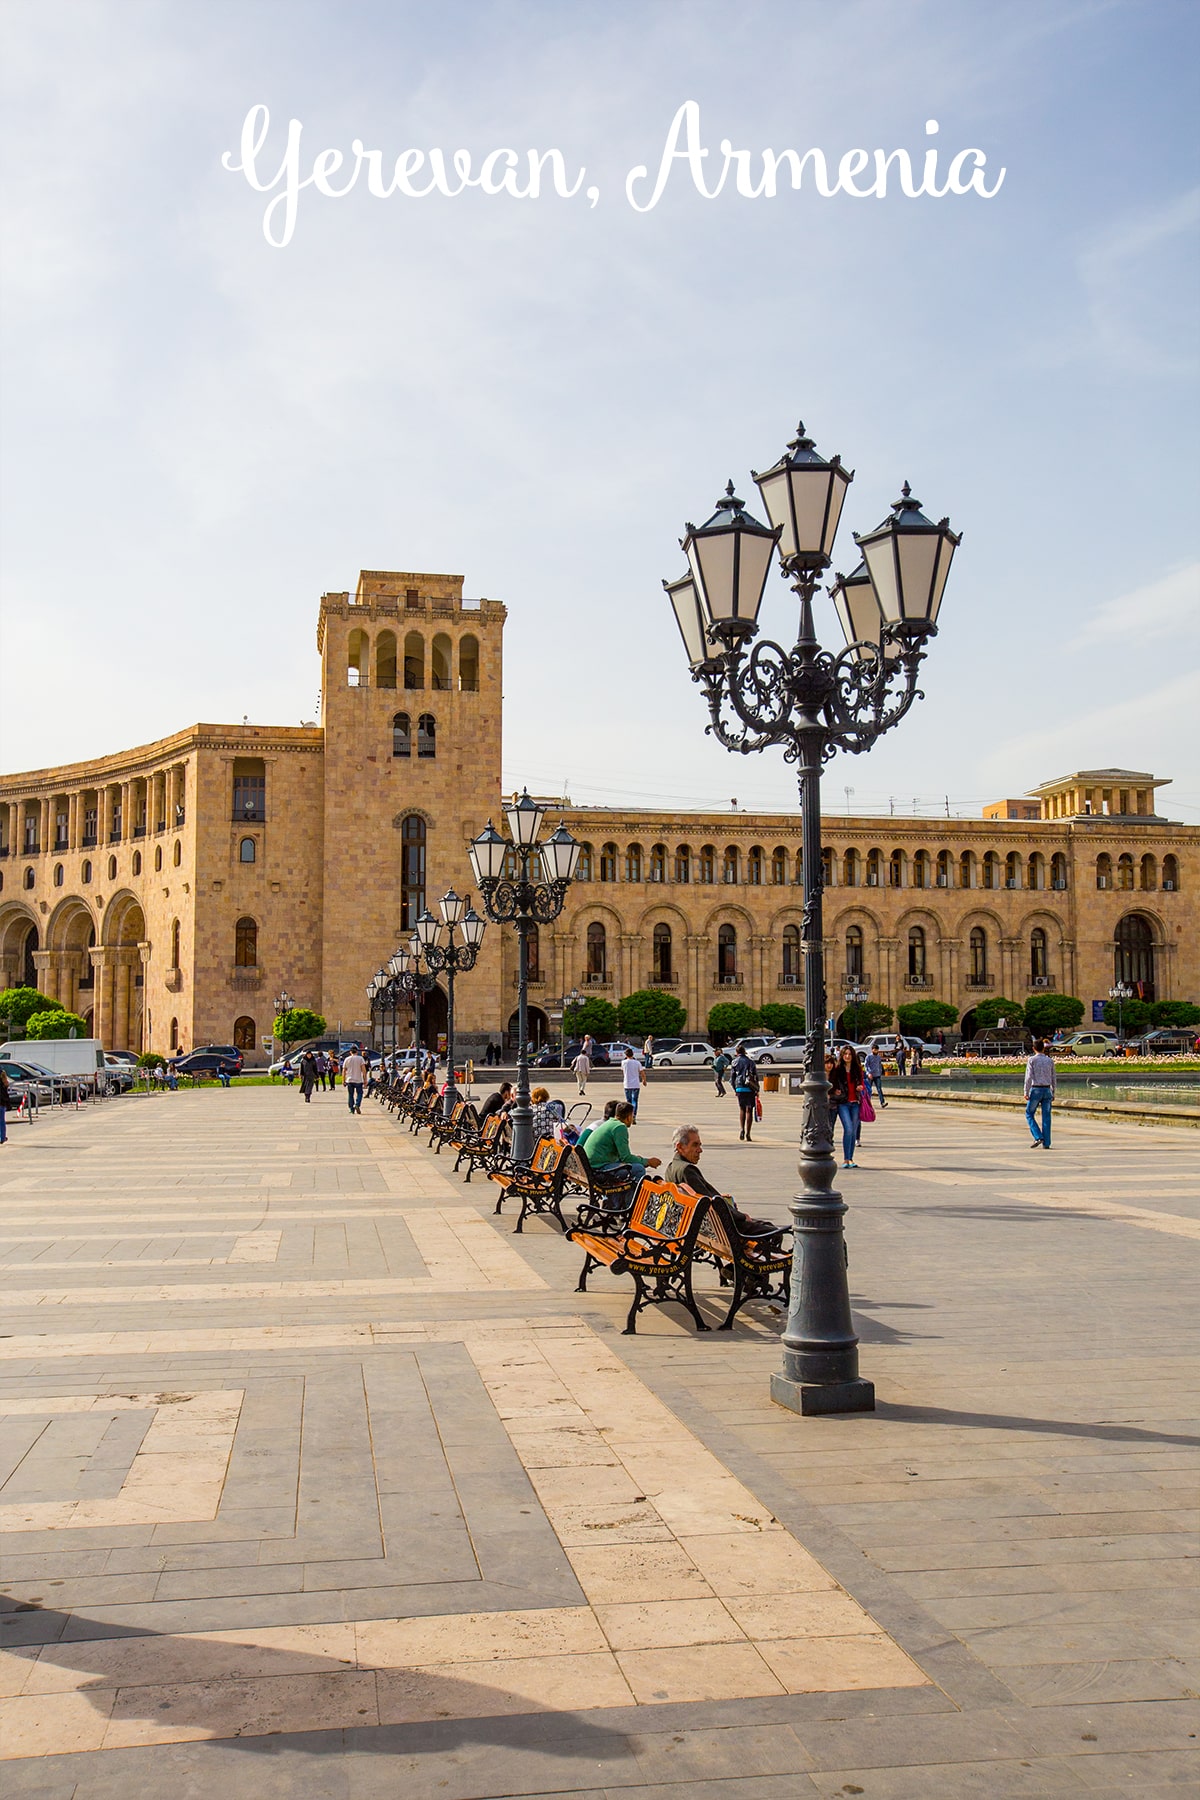 Yerevan, Armenia- the rose city! Love all the gorgeous architecture!